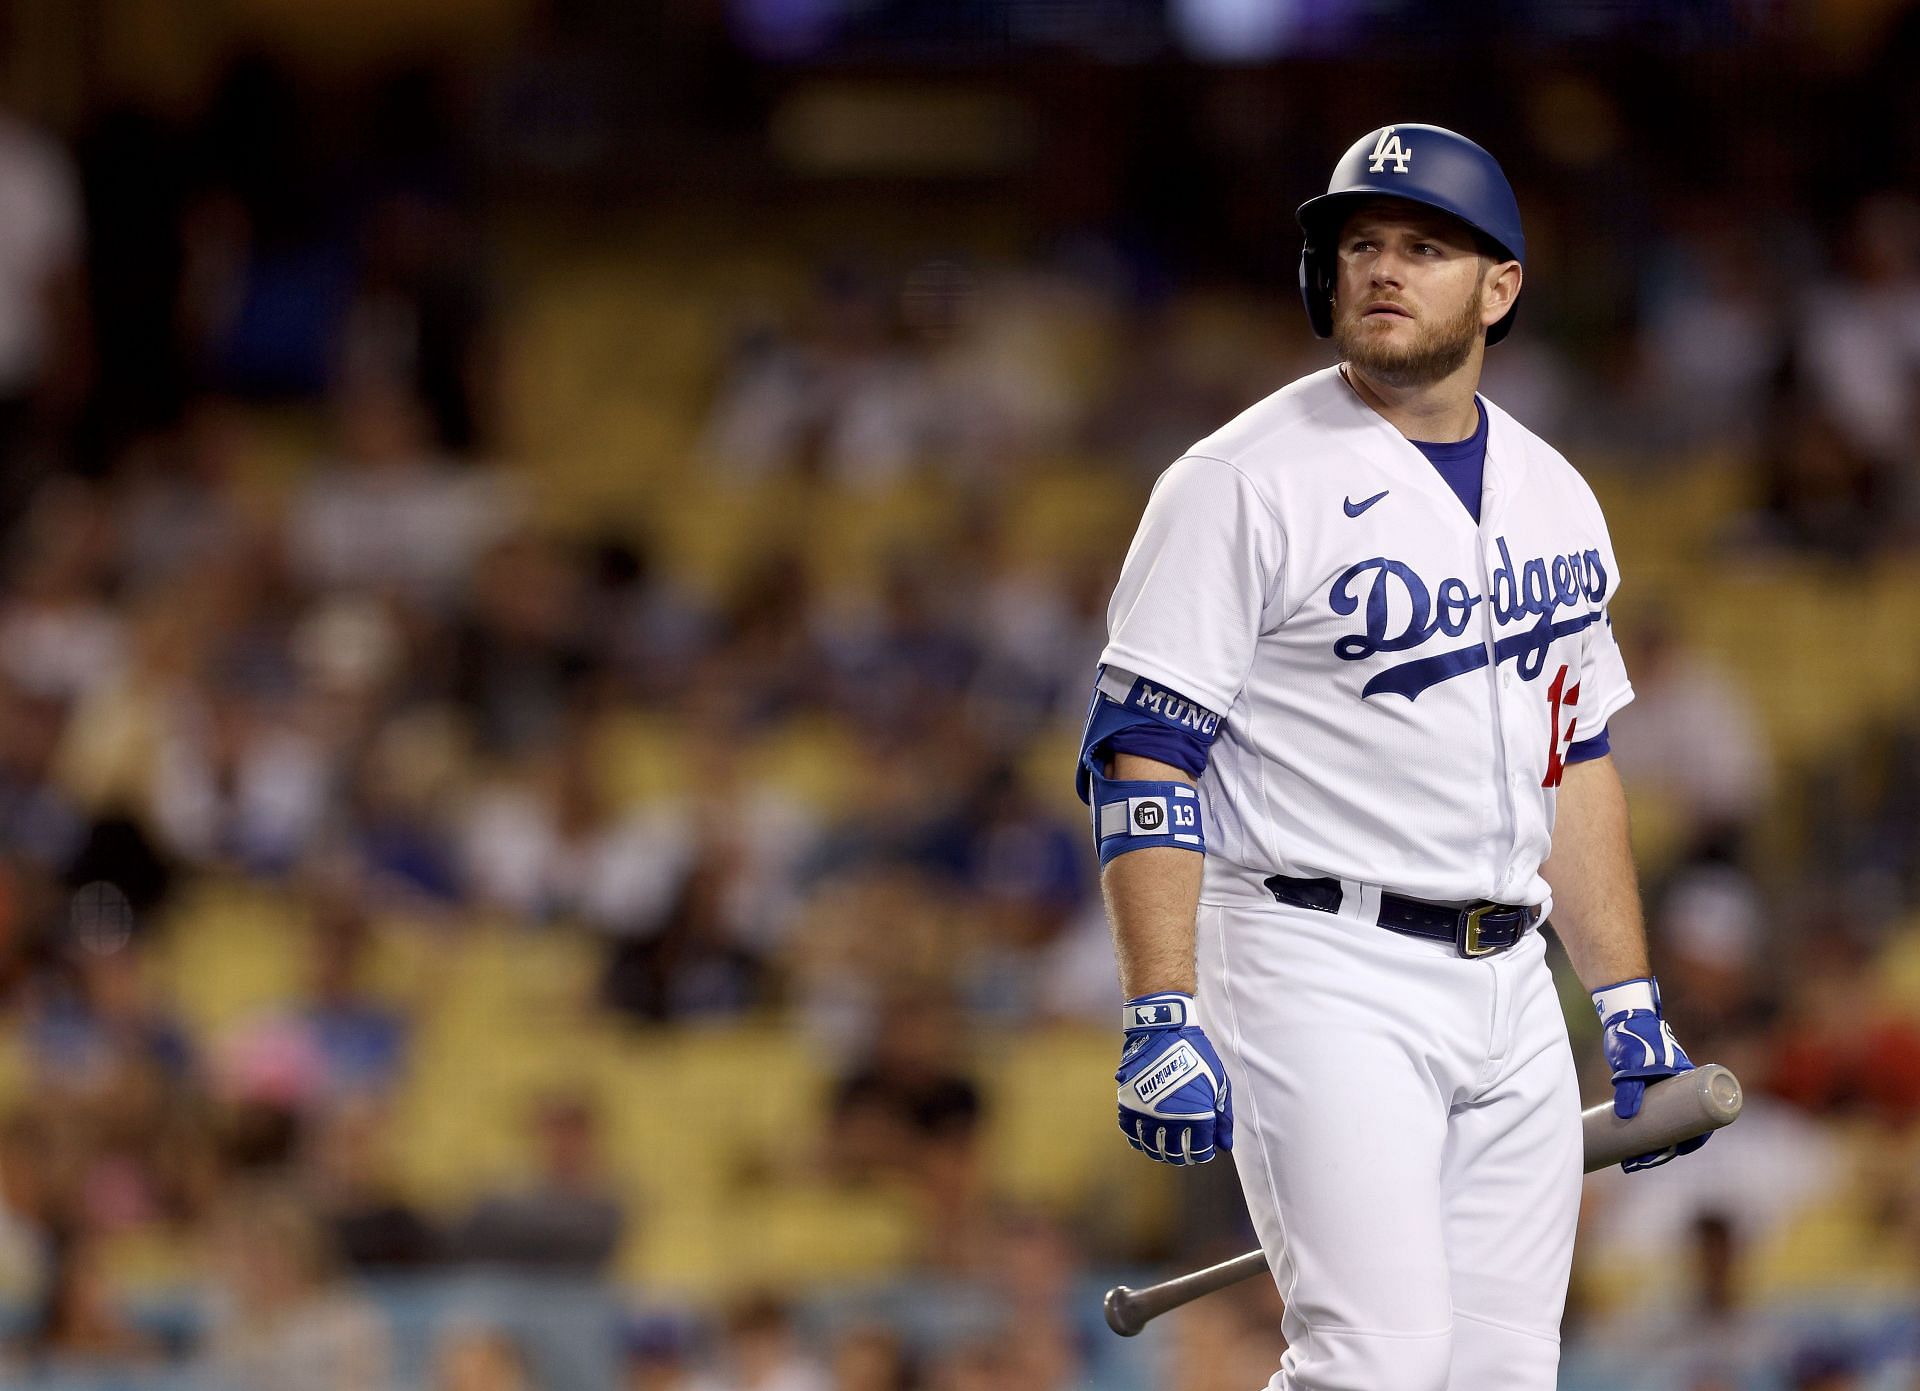 Los Angeles Dodgers infielder Max Muncy hit just his fourth home run of the season on Thursday.